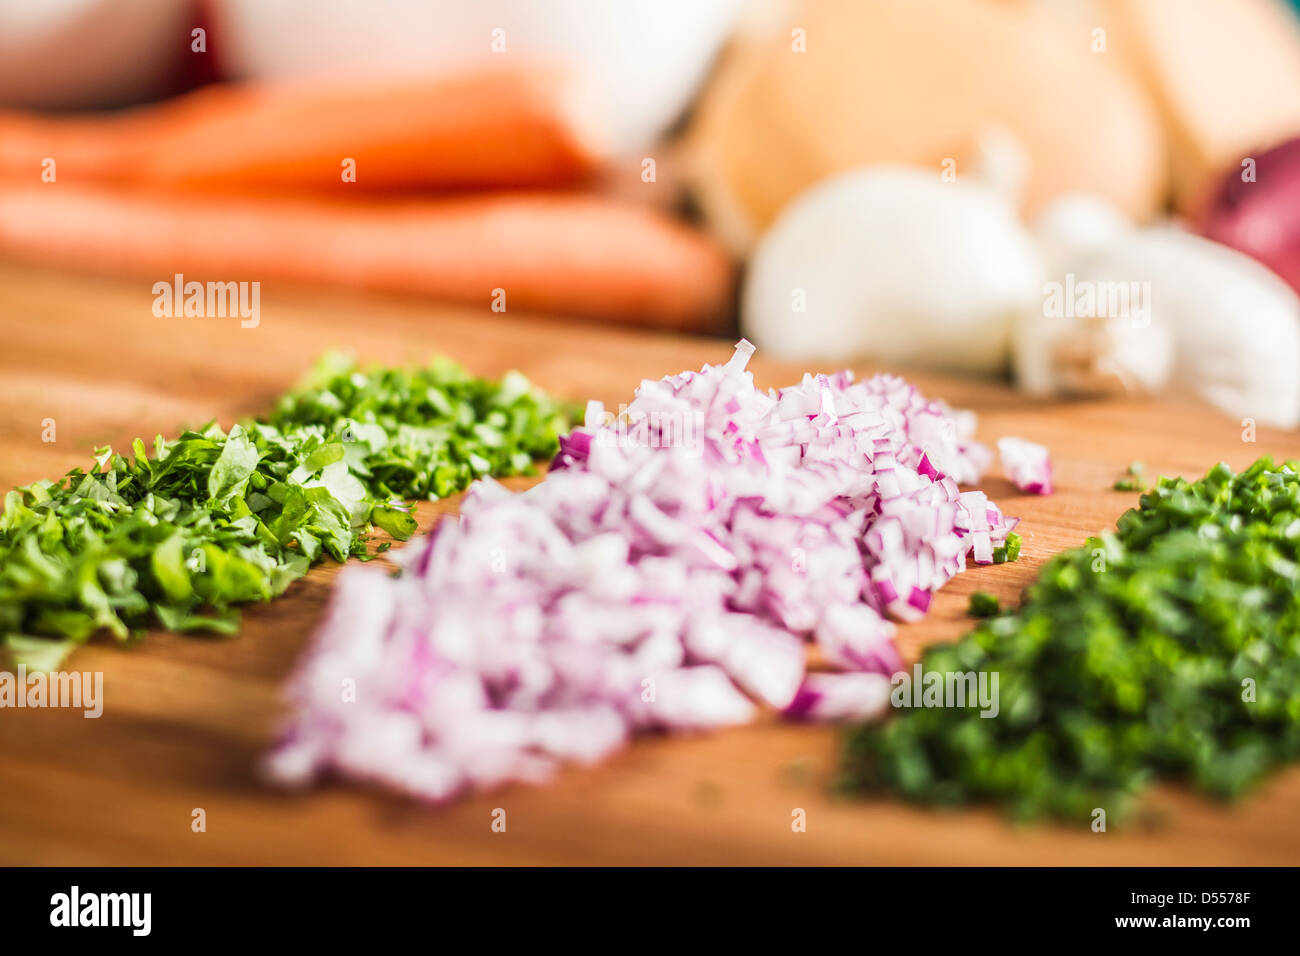 Close up of chopped chives and onions Stock Photo